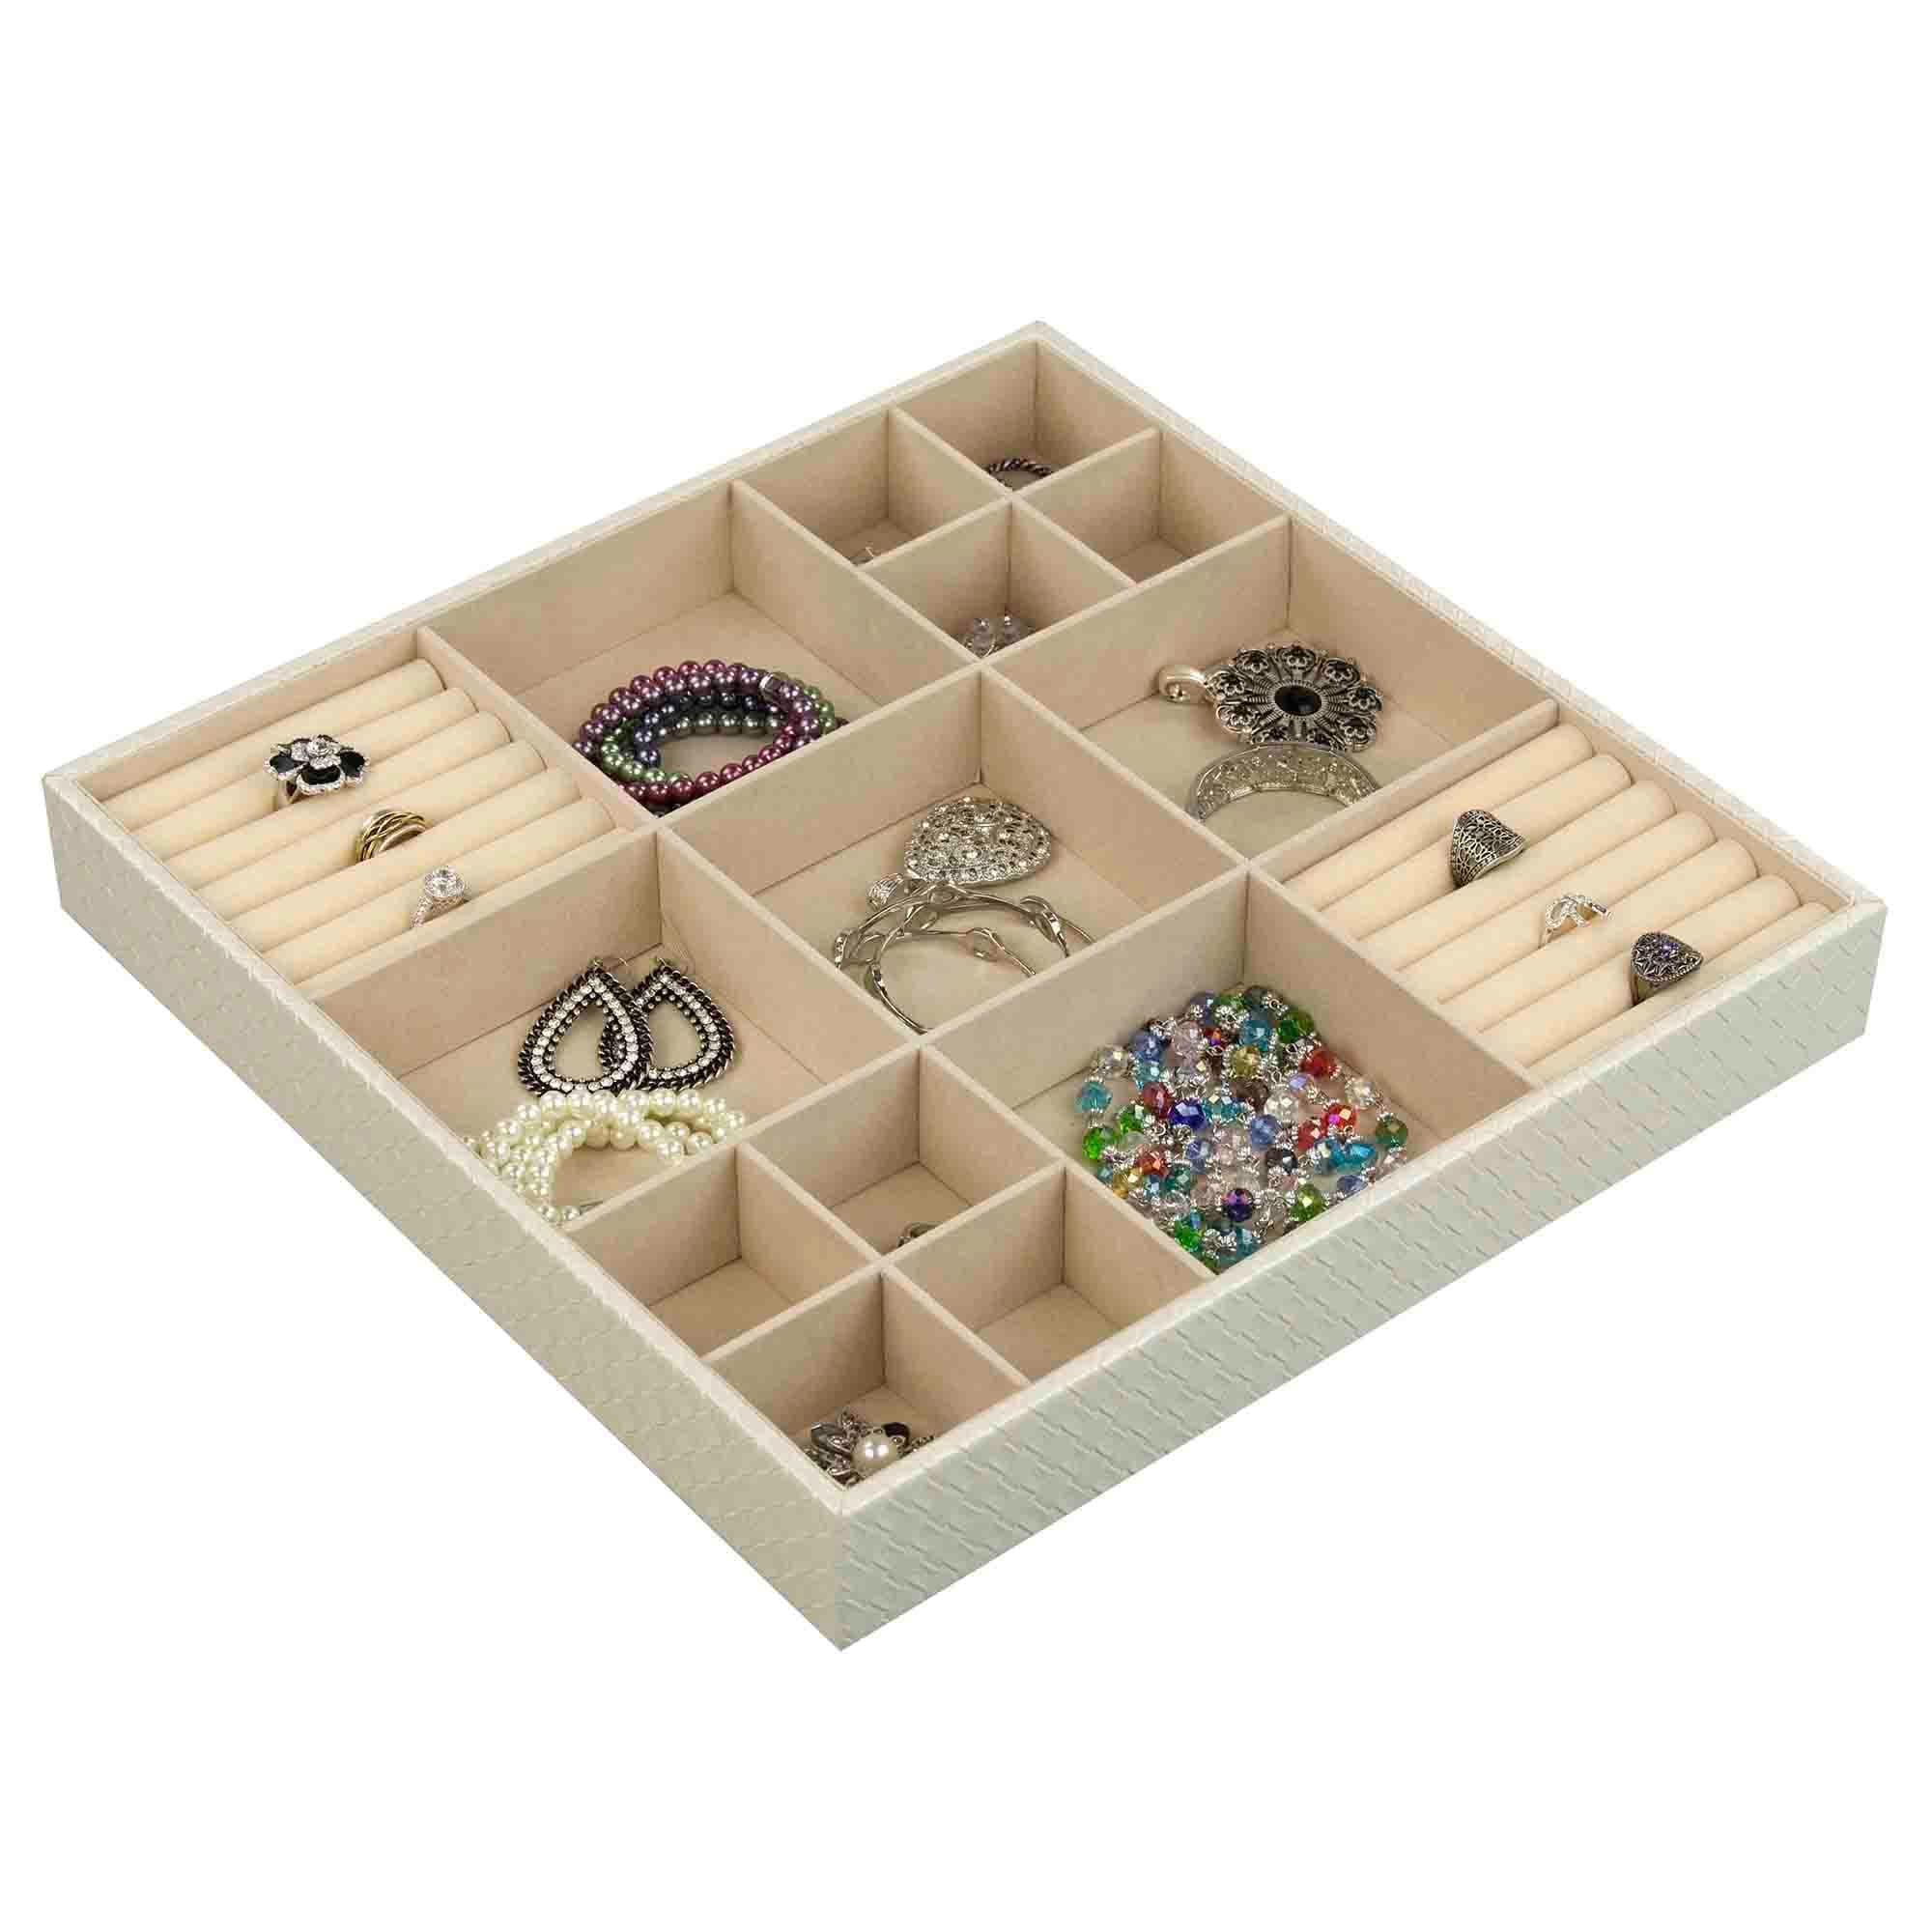 Home Basics 15-Compartment Jewelry Organizer $12 EACH, CASE PACK OF 6